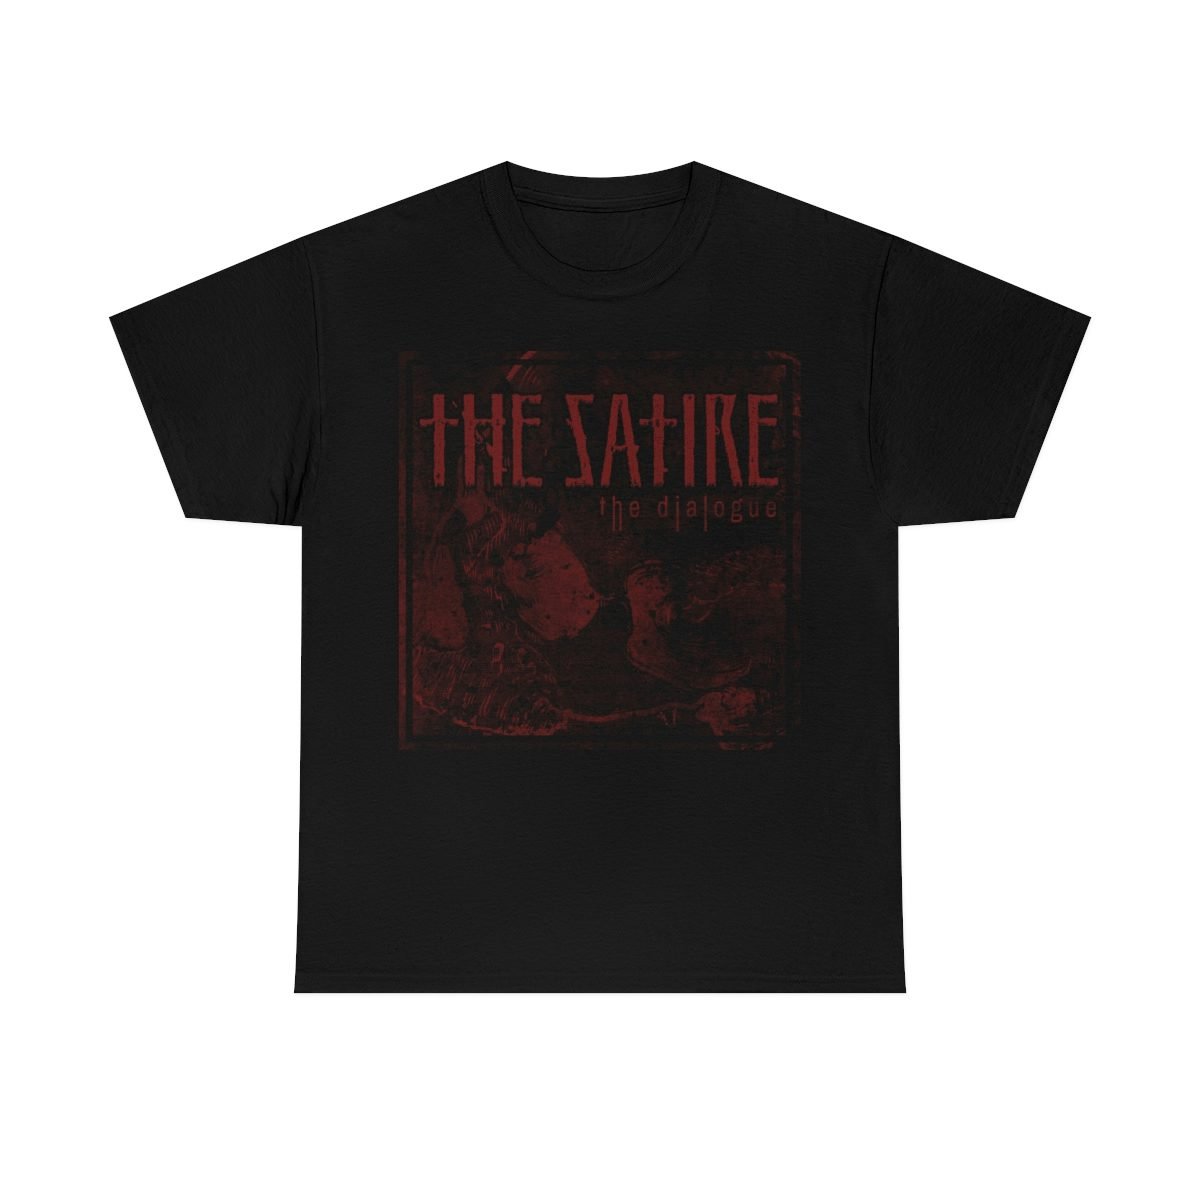 The Satire – The Dialogue (The Charon Collective) Short Sleeve Tshirt